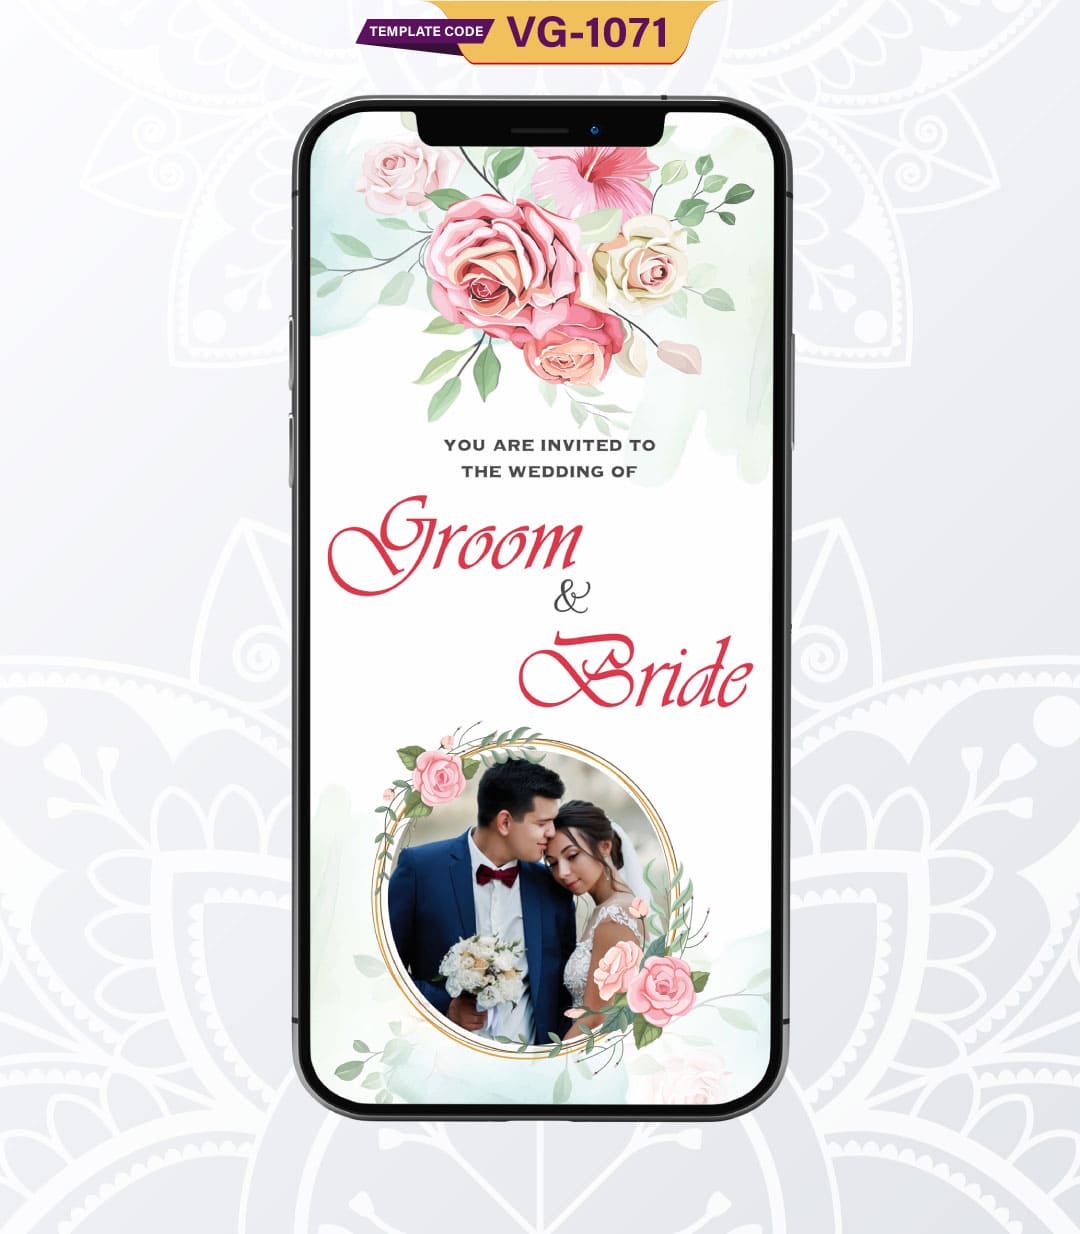 Floral Save The Date Wedding Invite